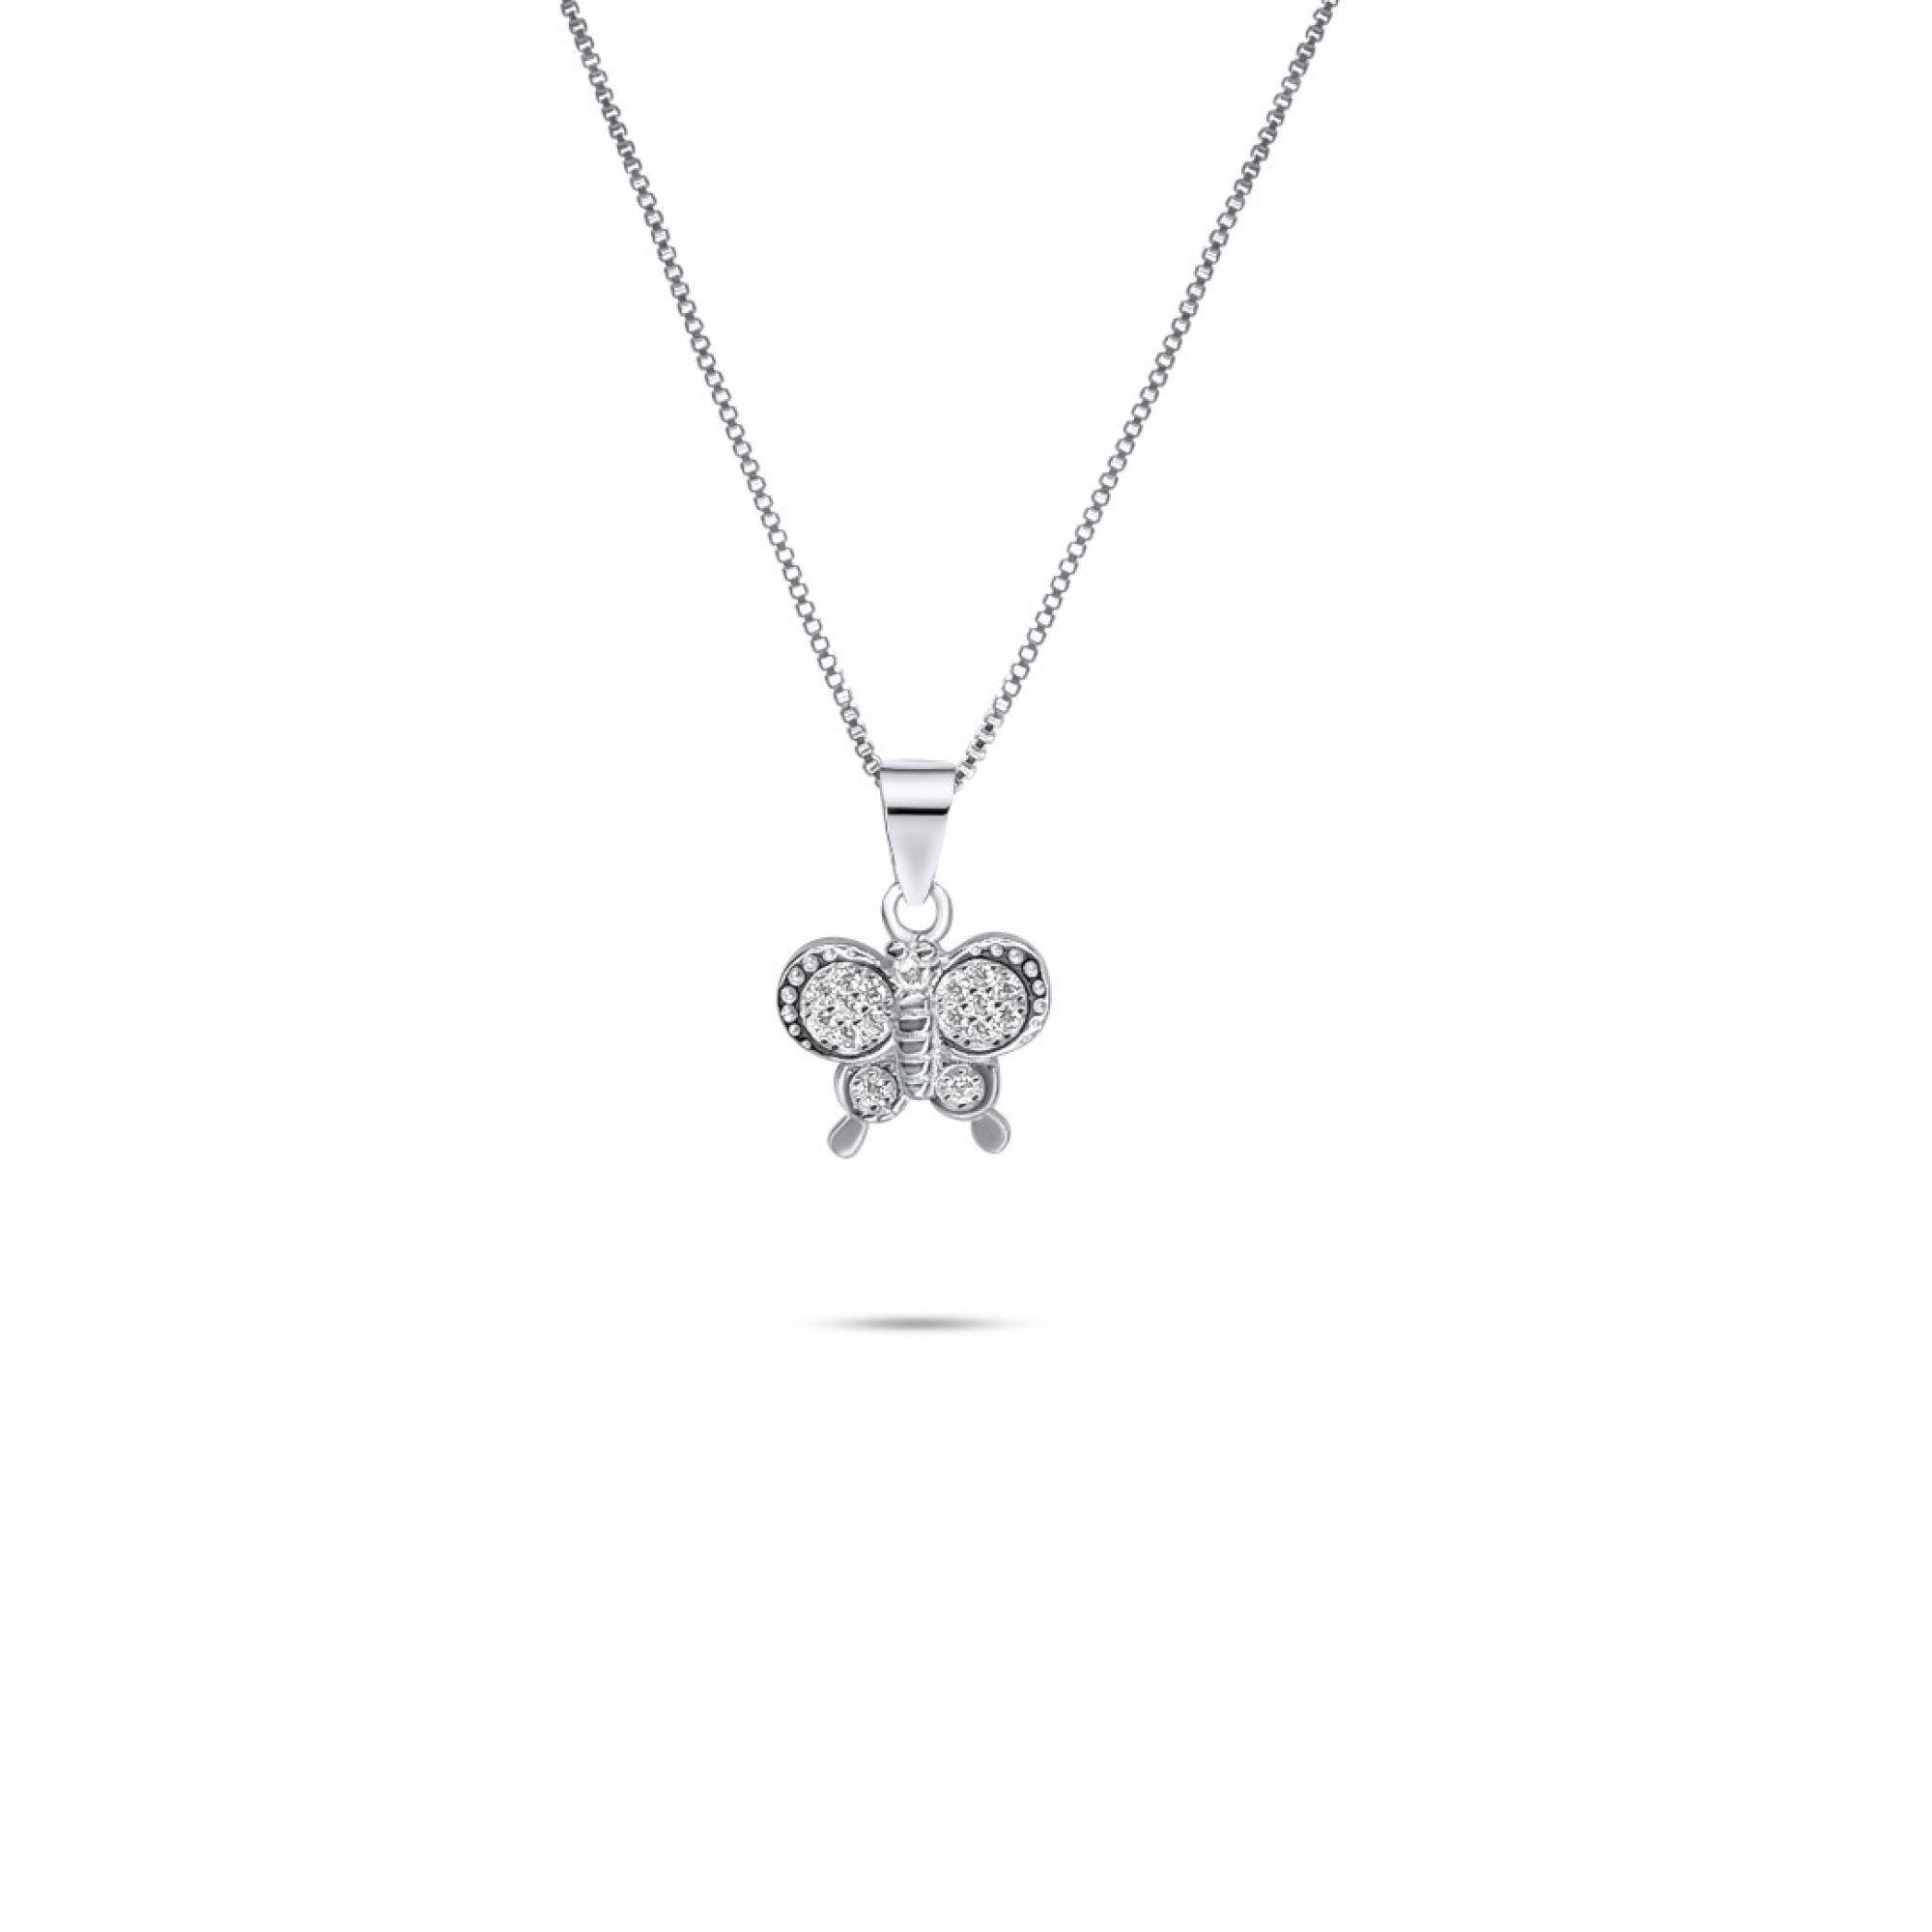 Butterfly necklace with zircon stones